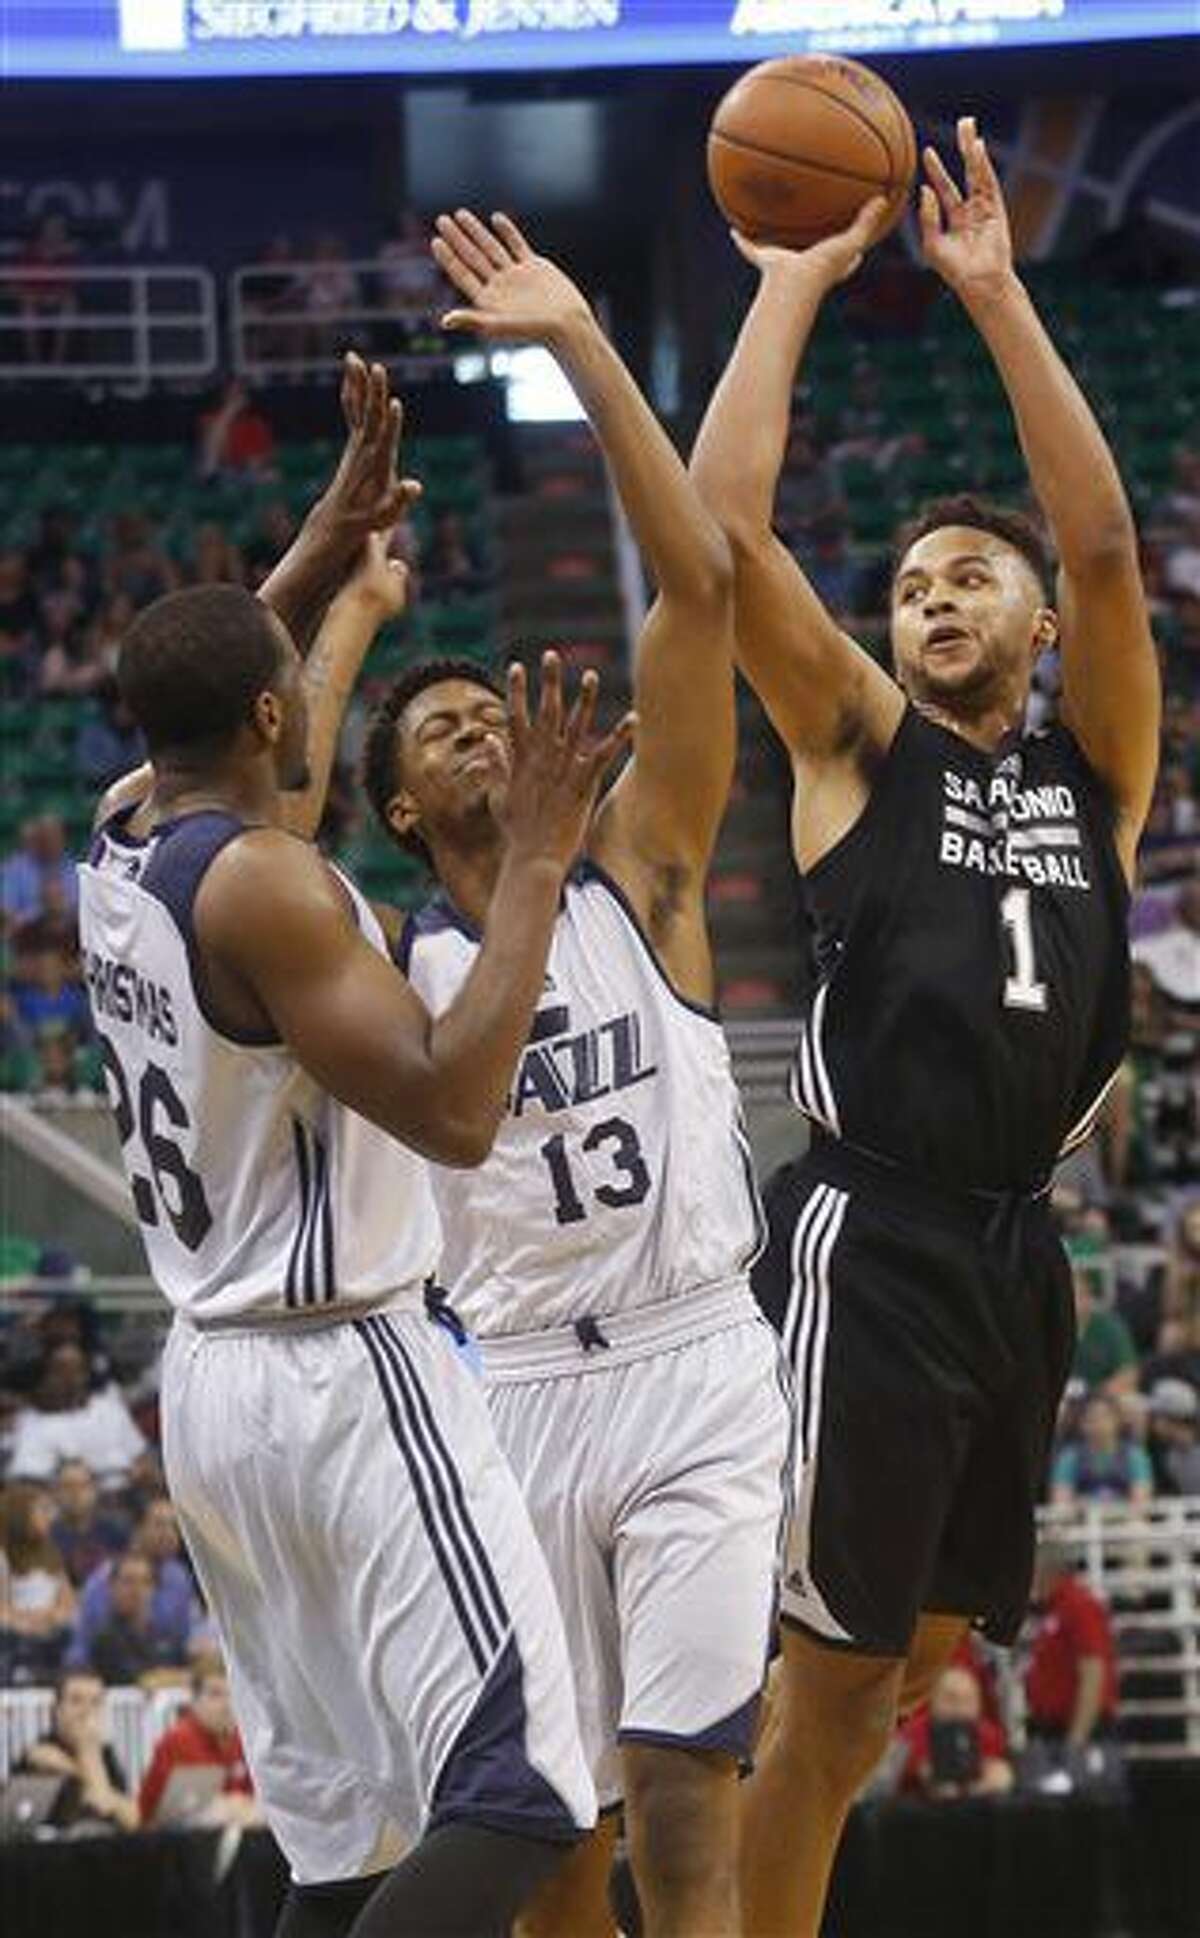 San Antonio Spurs' Kyle Anderson (1) shoots as Utah Jazz's Tyrone Wallace (13) and Dionte Christmas (26) defend during the first half of an NBA Summer League basketball game Monday, July 4, 2016, in Salt Lake City. (AP Photo/Kim Raff)